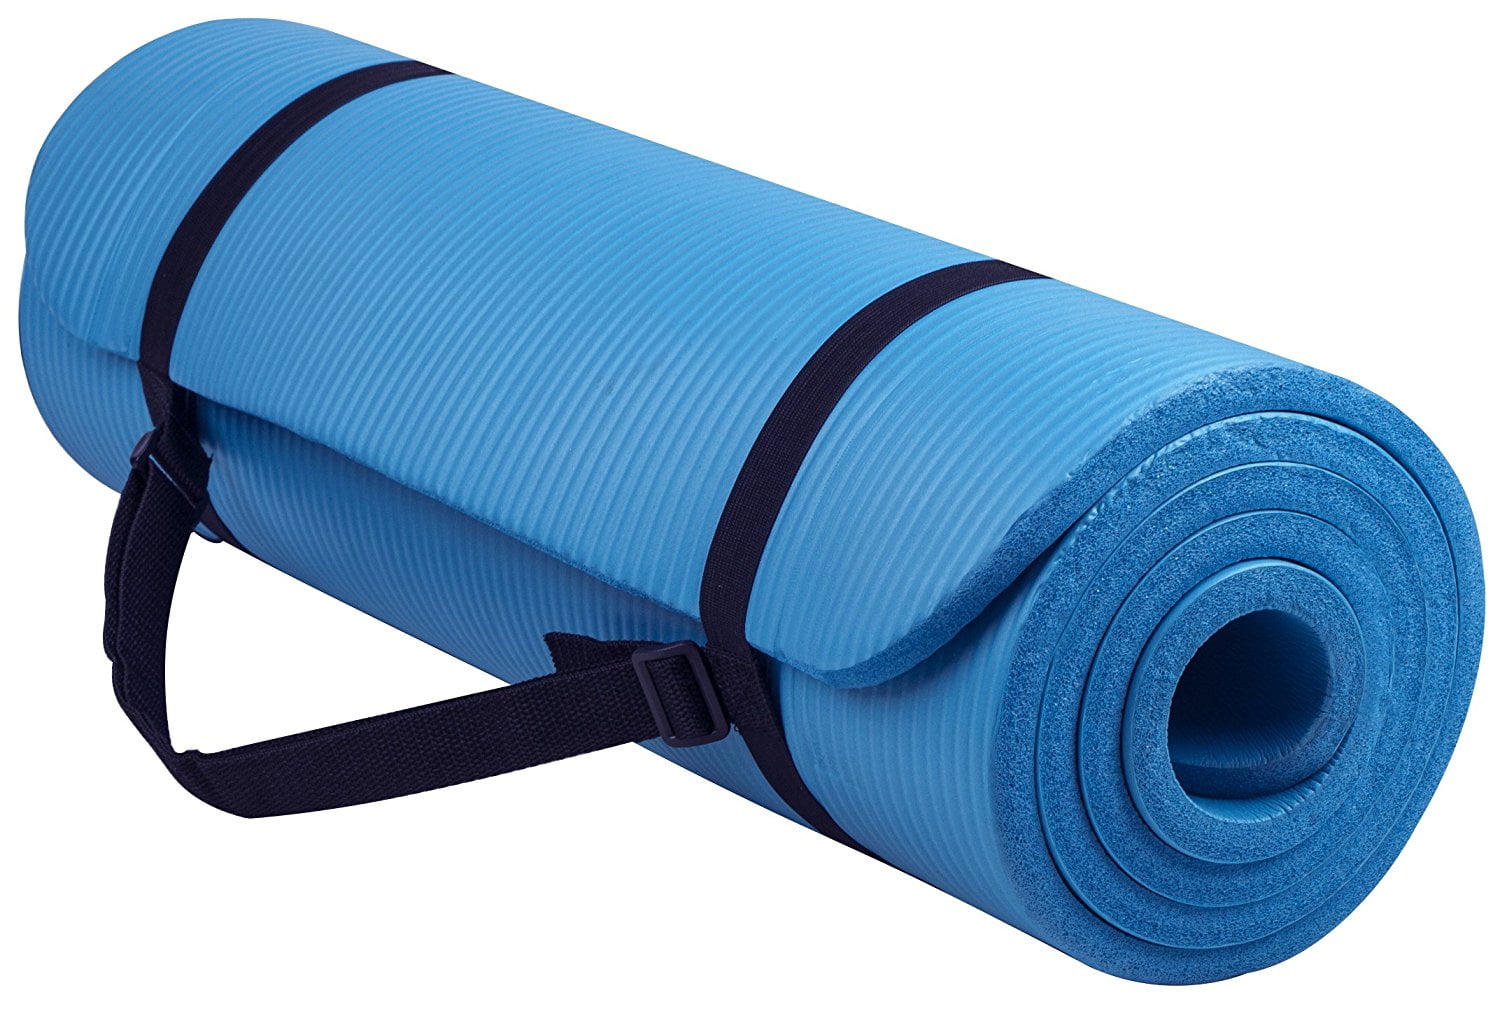 BalanceFrom 1/2 In. Yoga Mat, Blue